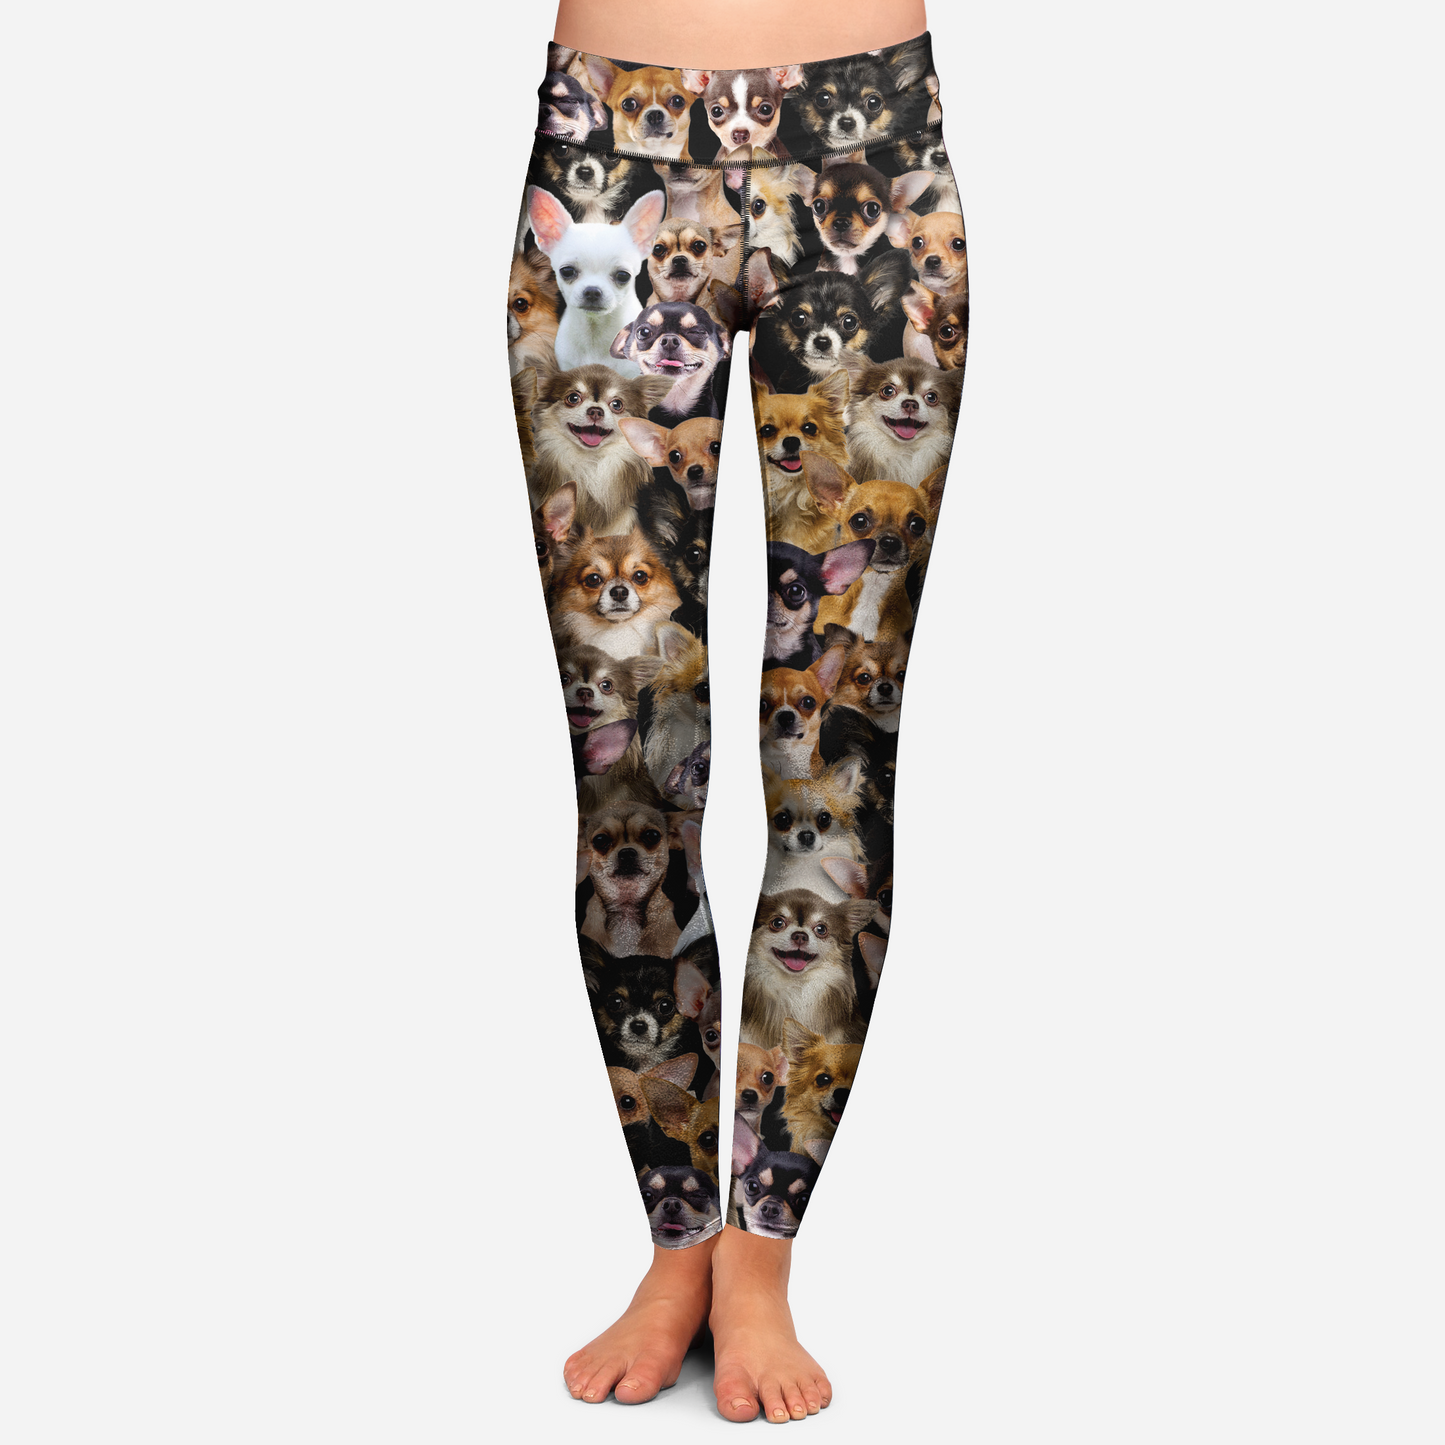 You Will Have A Bunch Of Chihuahuas - Leggings V1